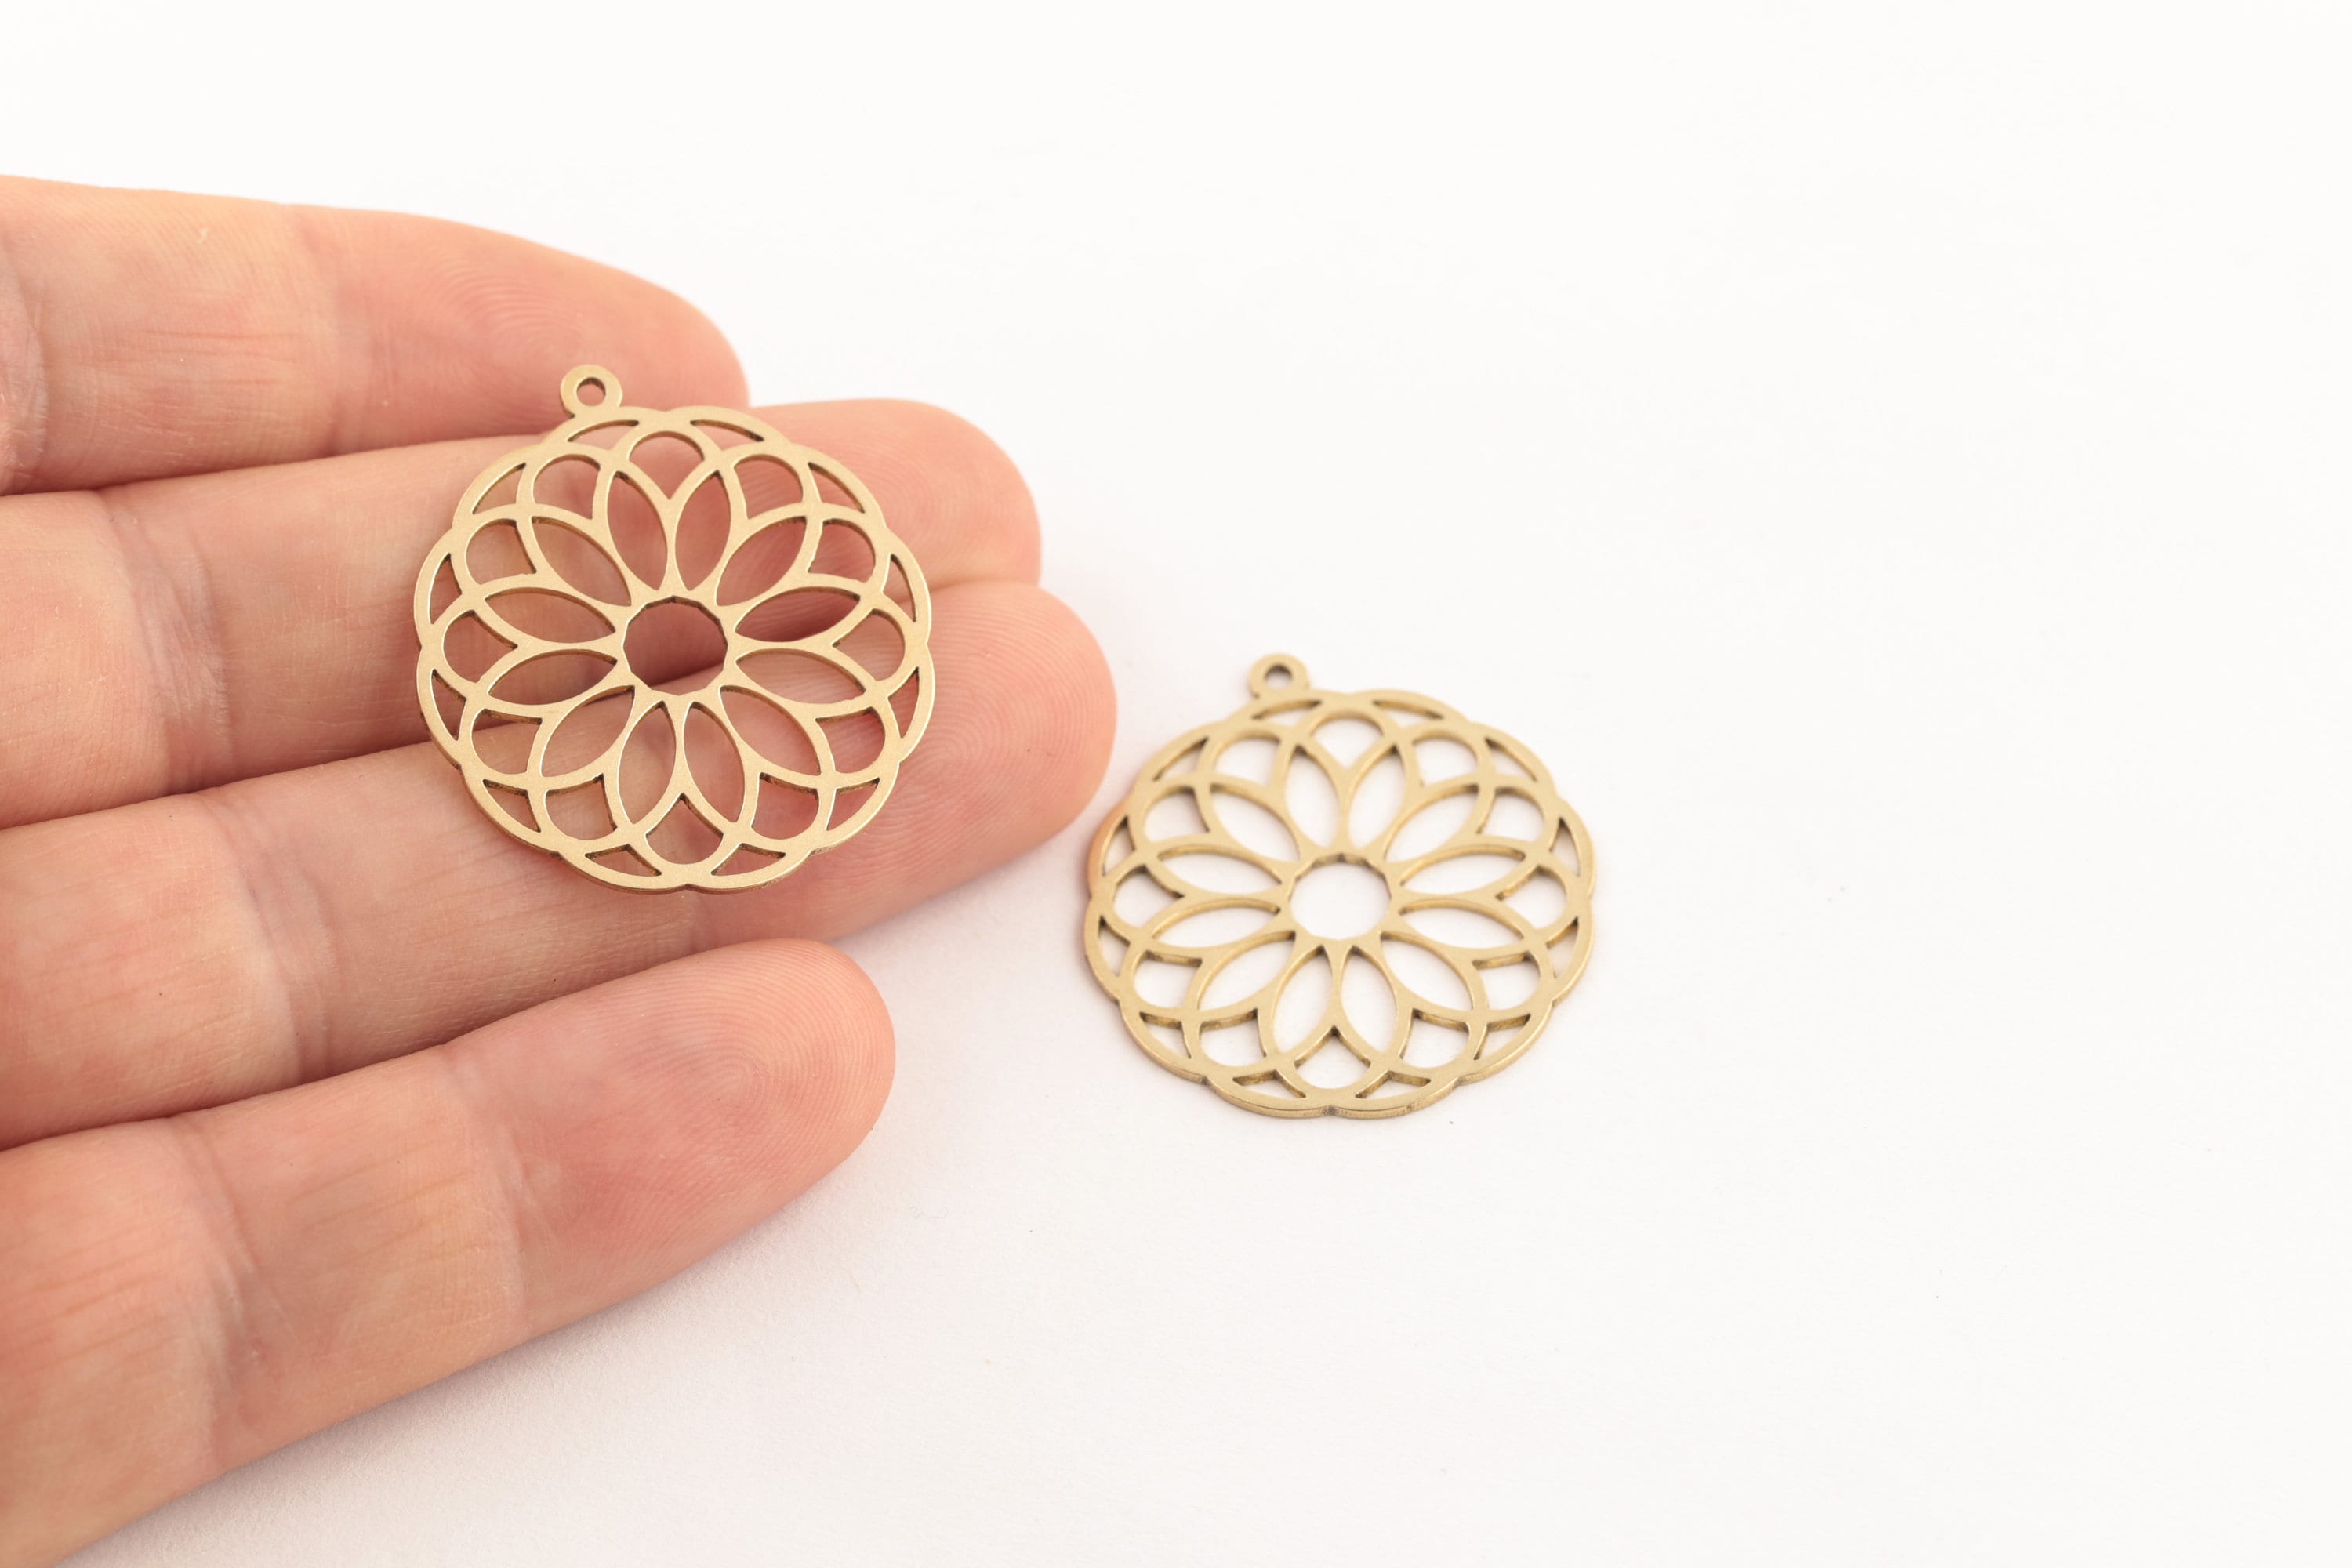 WYSIWYG 20pcs Charms 21x10mm Flower Charms For Jewelry Making DIY